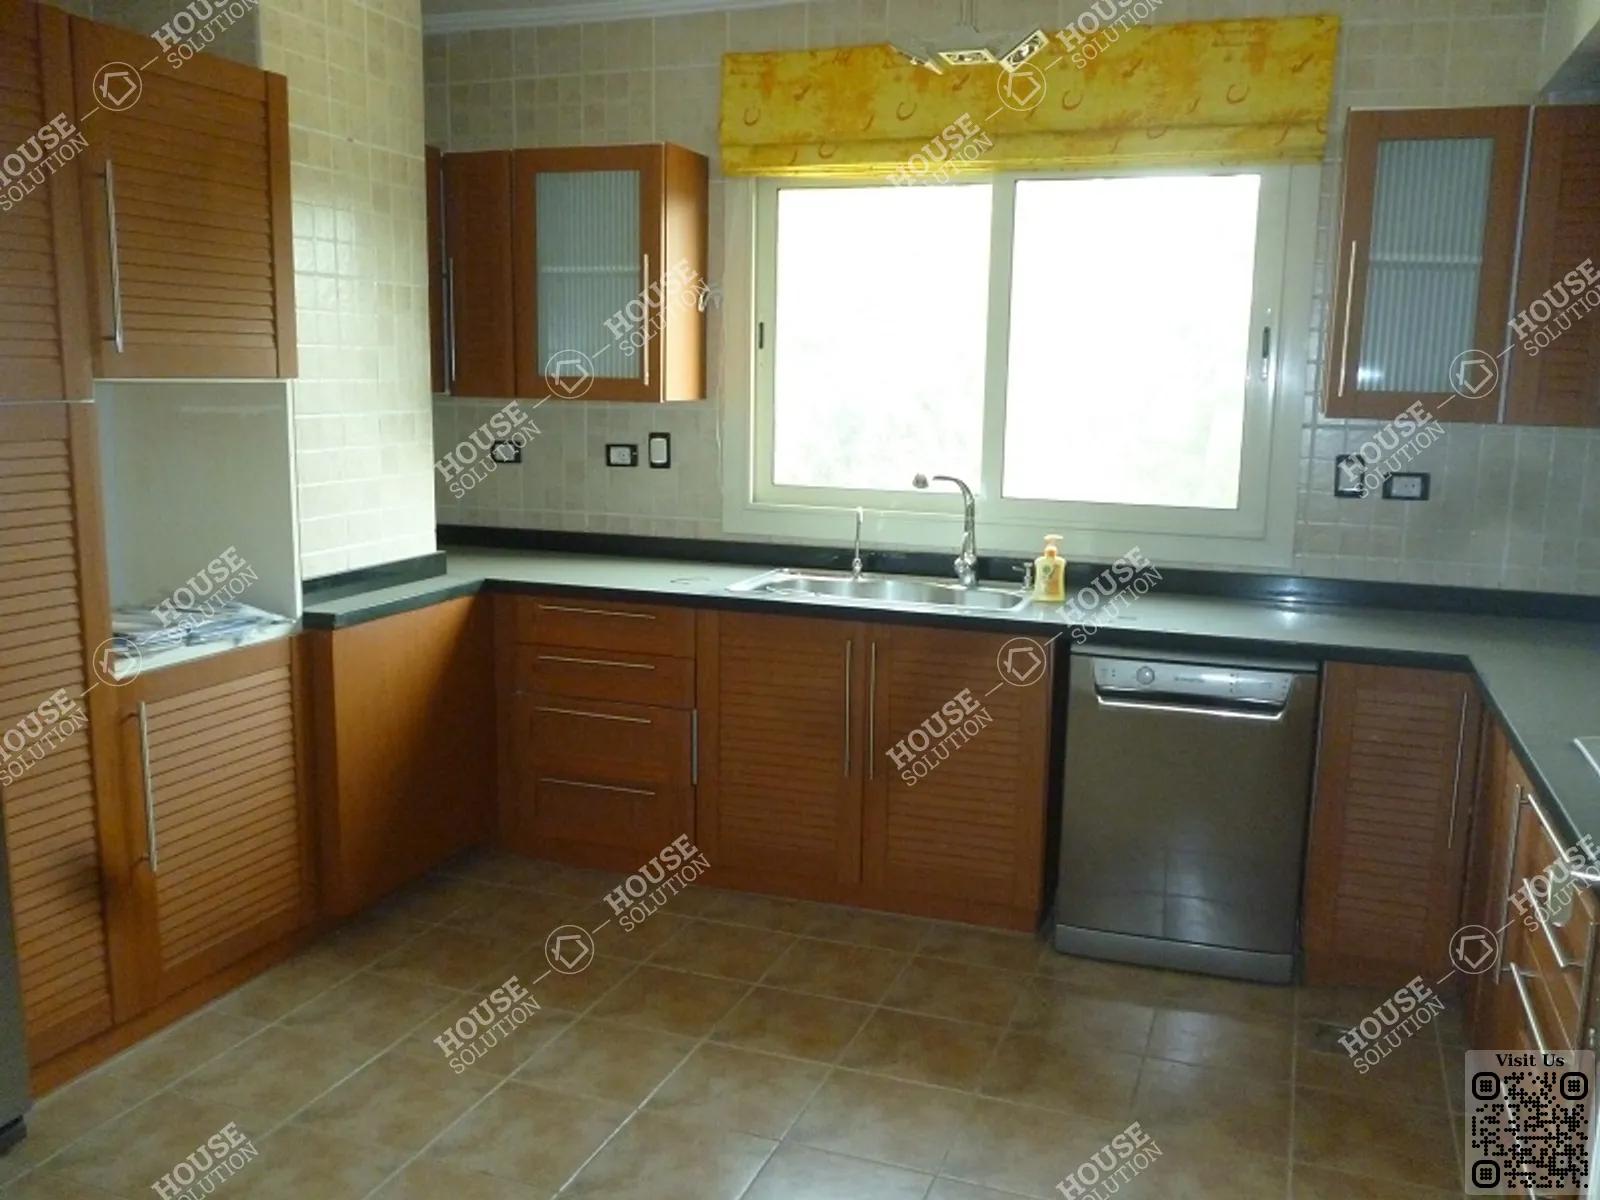 KITCHEN  @ Penthouses For Rent In Maadi Maadi Sarayat Area: 420 m² consists of 4 Bedrooms 6 Bathrooms Semi furnished 5 stars #4949-2